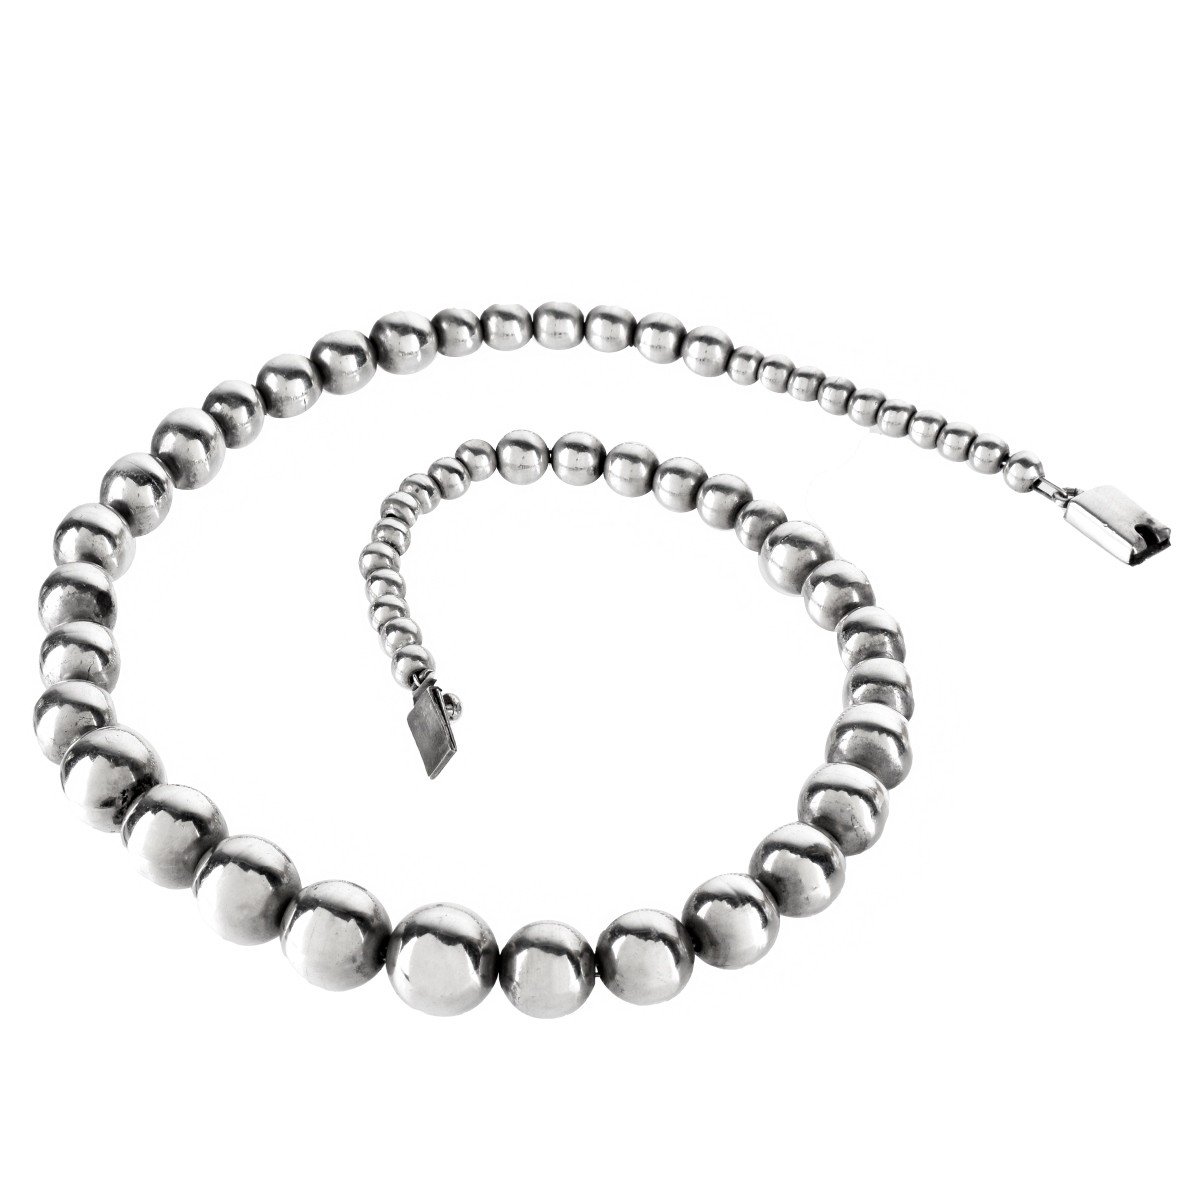 Mexican Silver Bead Necklace